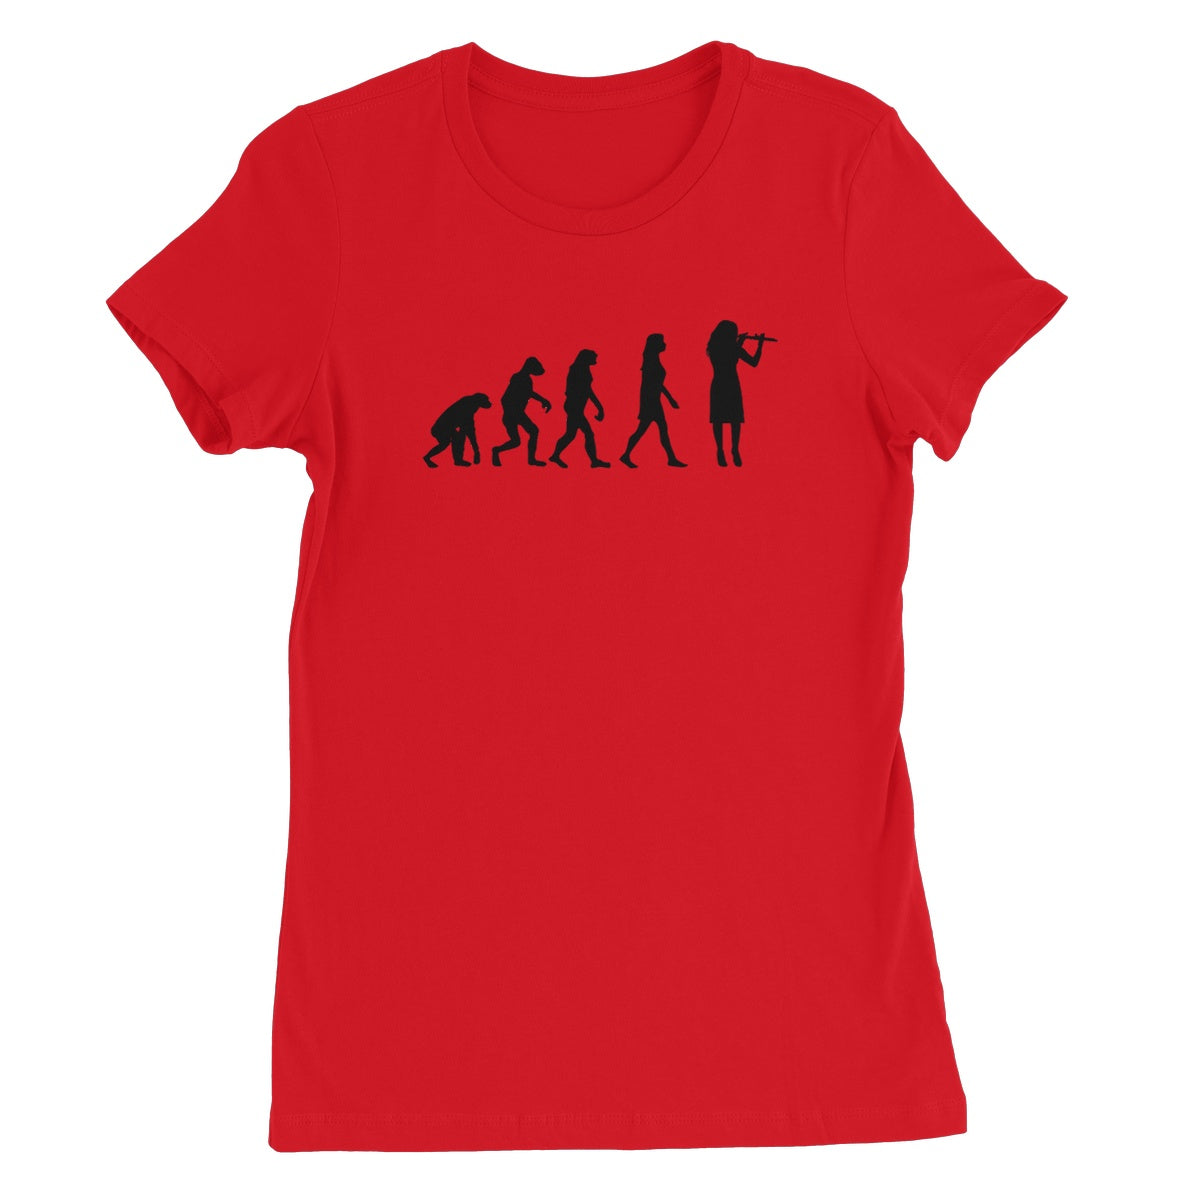 Evolution of Female Flute Players Women's Favourite T-Shirt